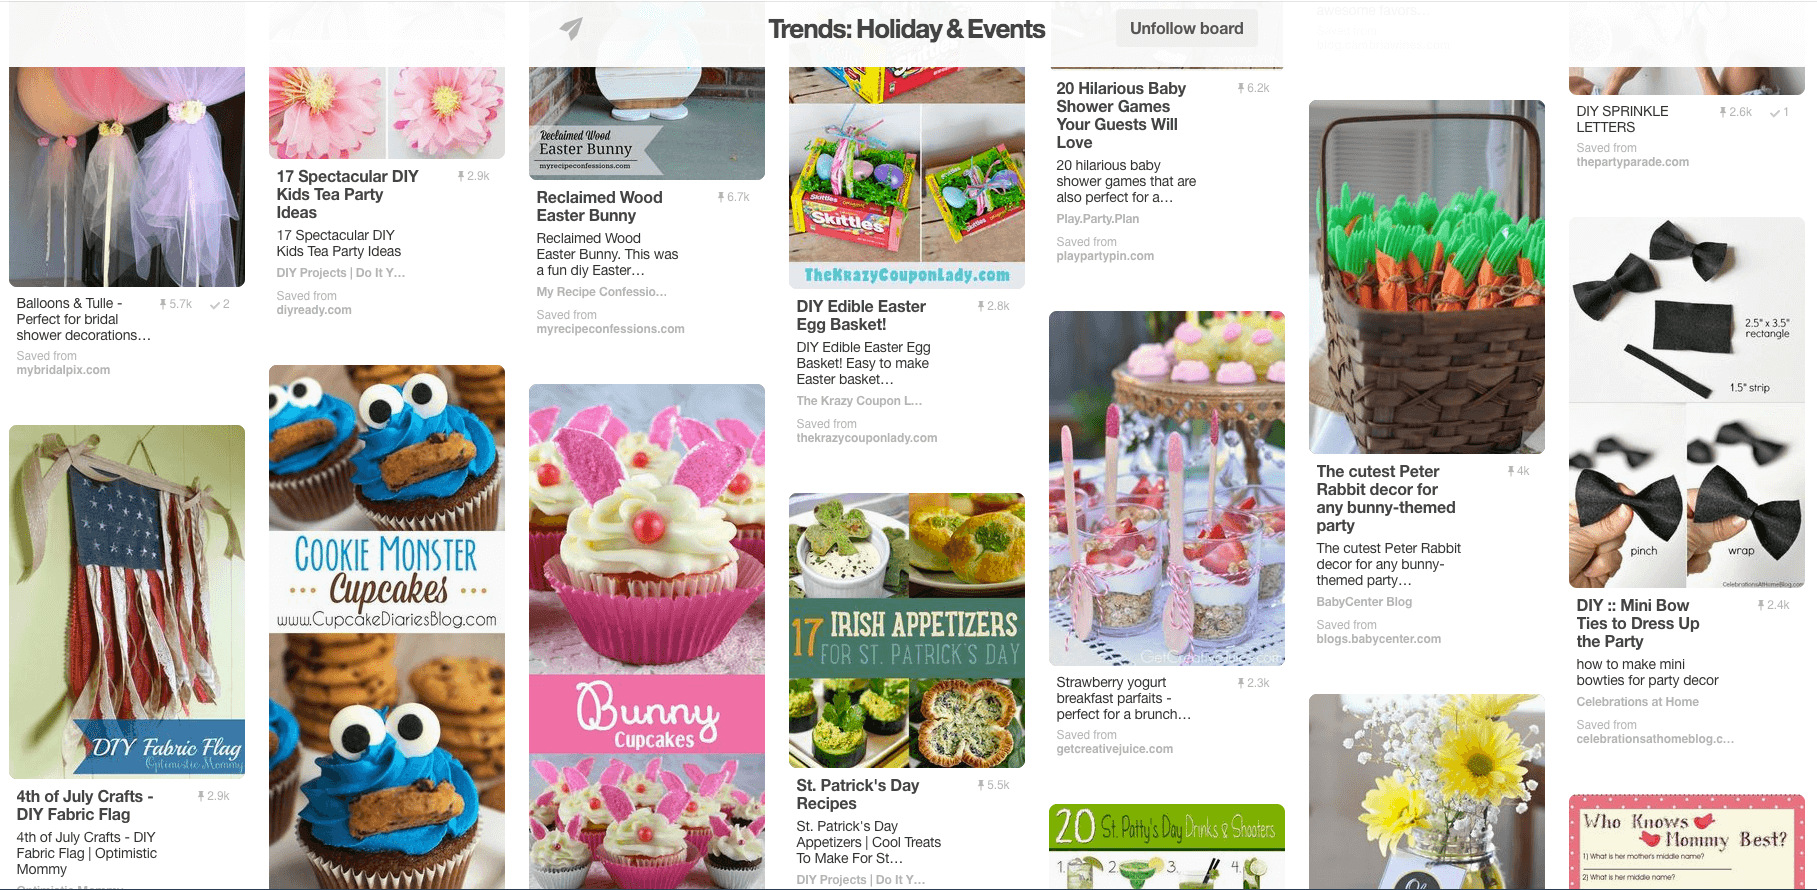 March Pinterest Trend in Holiday & Events